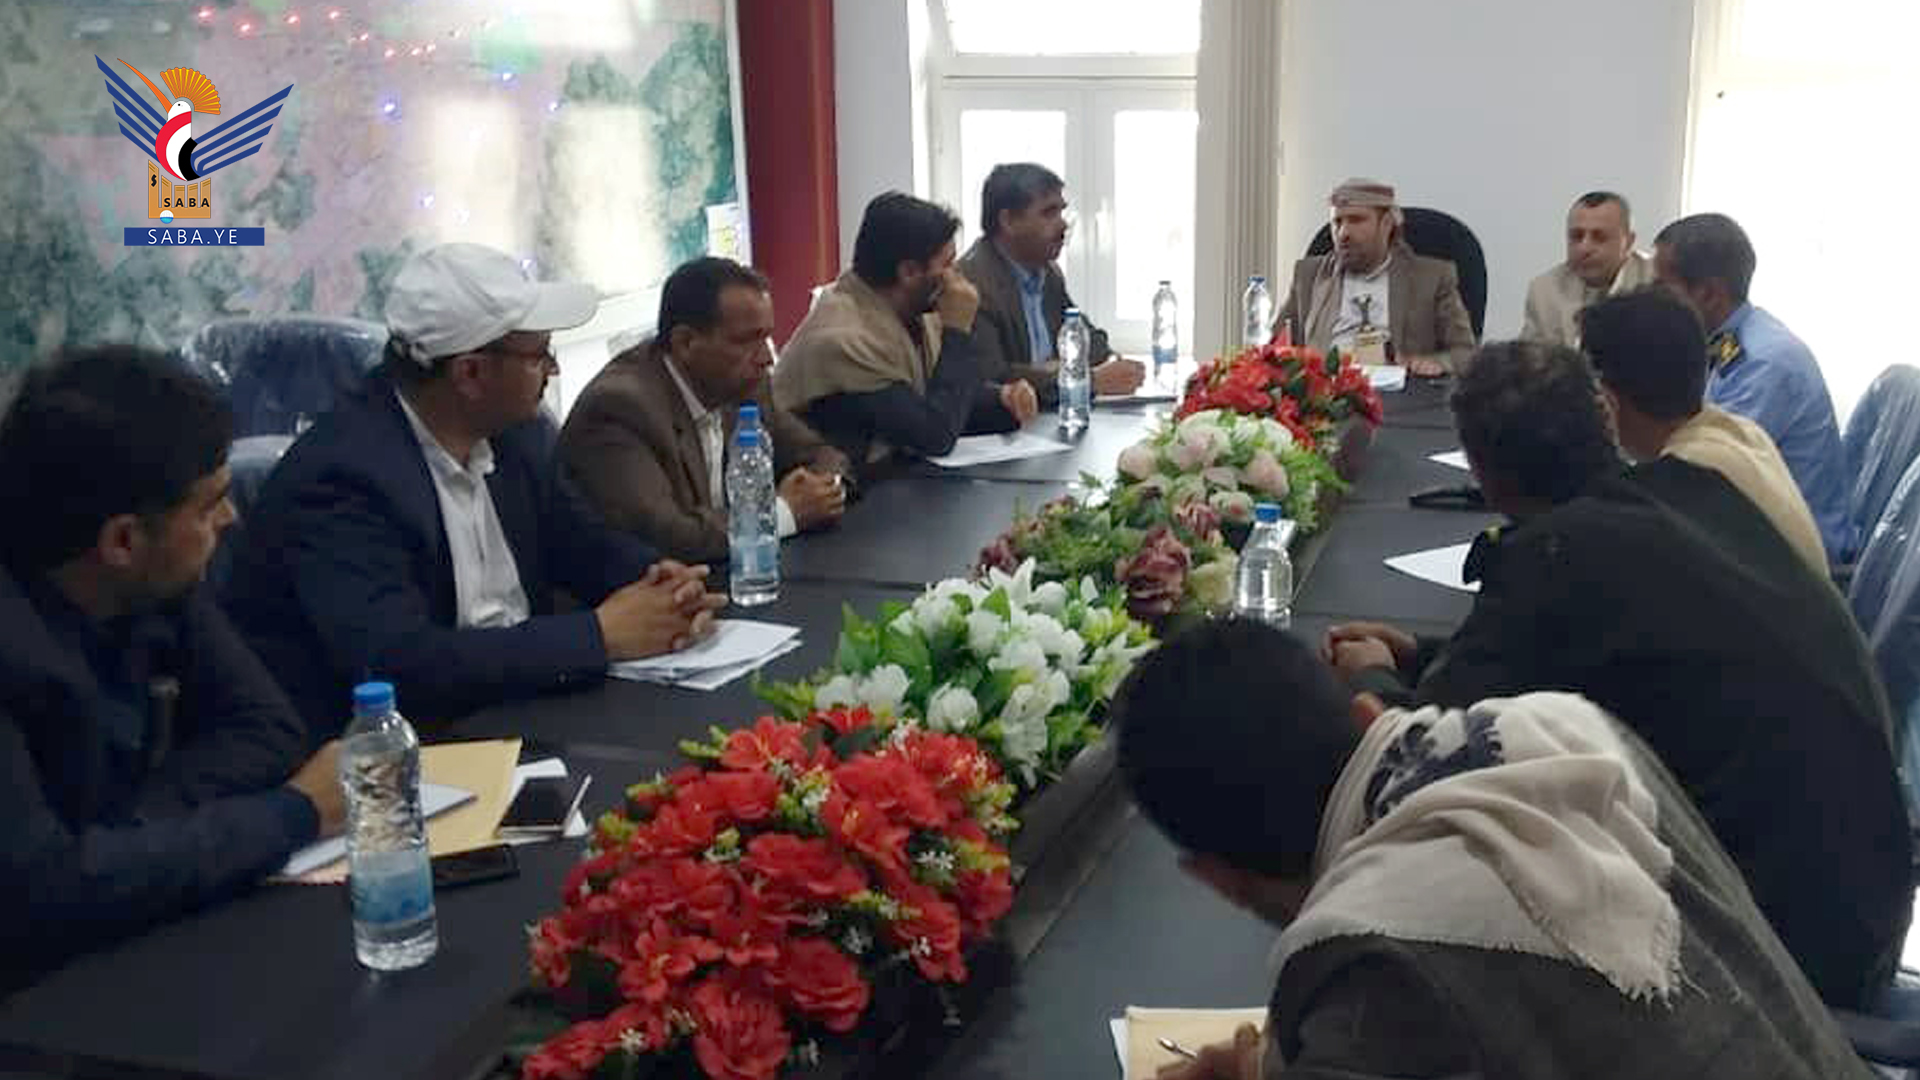 Measures to protect citizens from dangers of fireworks in old city of Sana’a discussed 